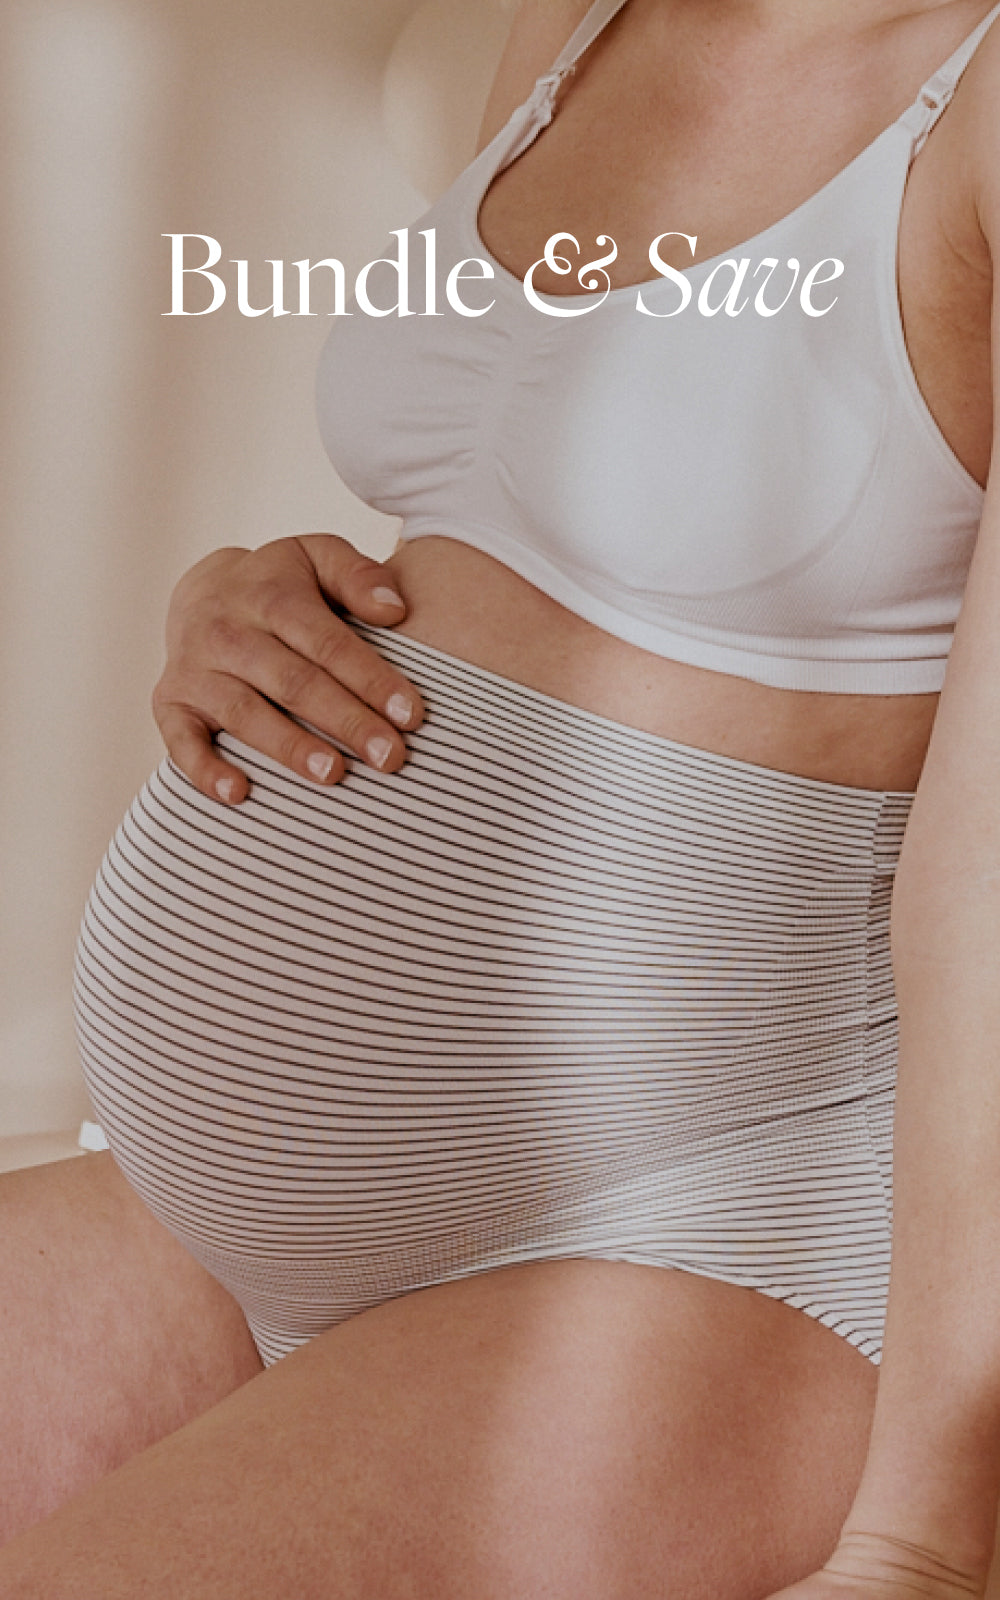 Maternity Underwear: Explore Comfortable & Supportive Styles